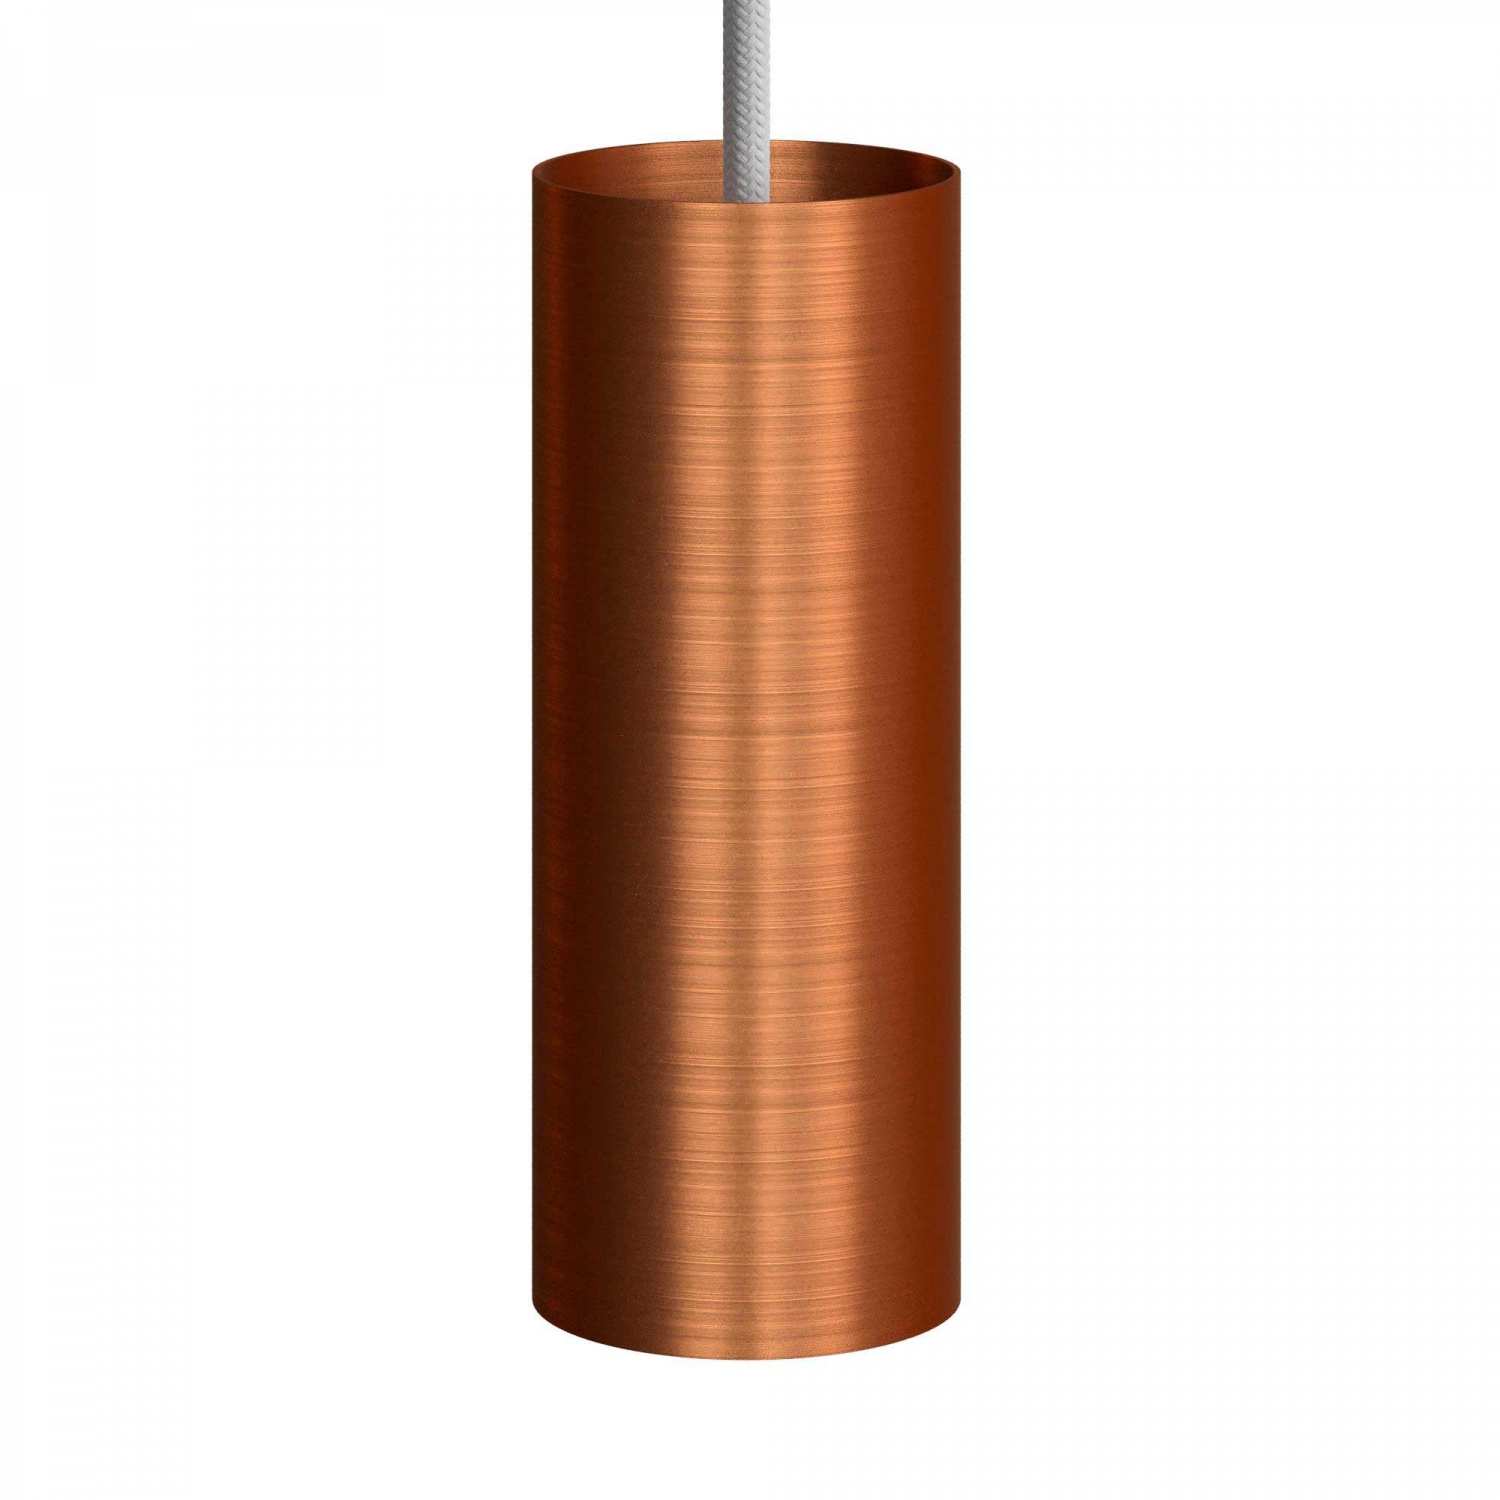 Pendant lamp with textile cable, Tub-E12 lampshade and metal details